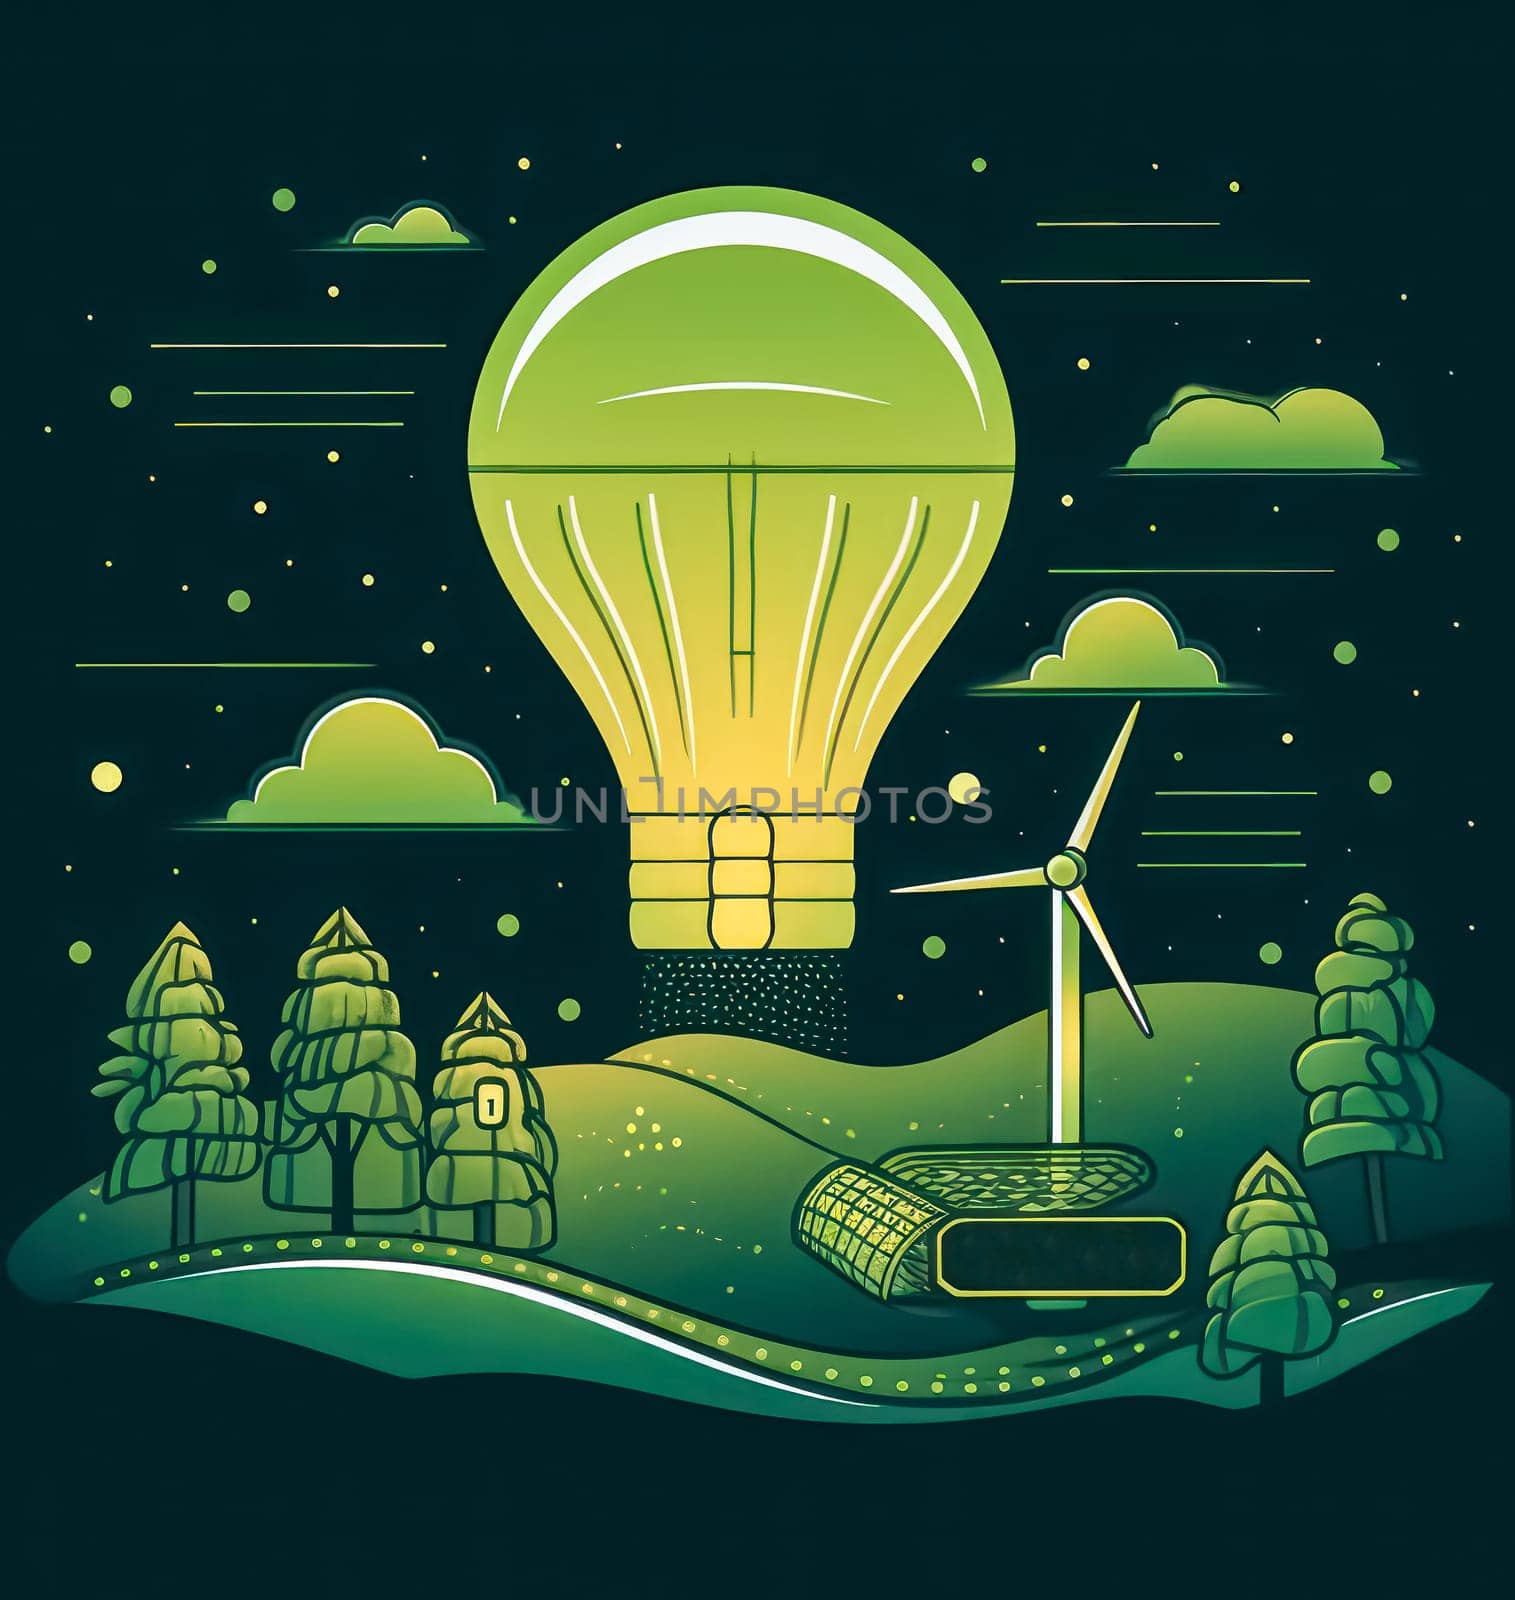 A green light bulb is flying through the sky above a windmill. The scene is set in a forest with trees and a hill in the background. Scene is peaceful and serene, with the light bulb representing hope